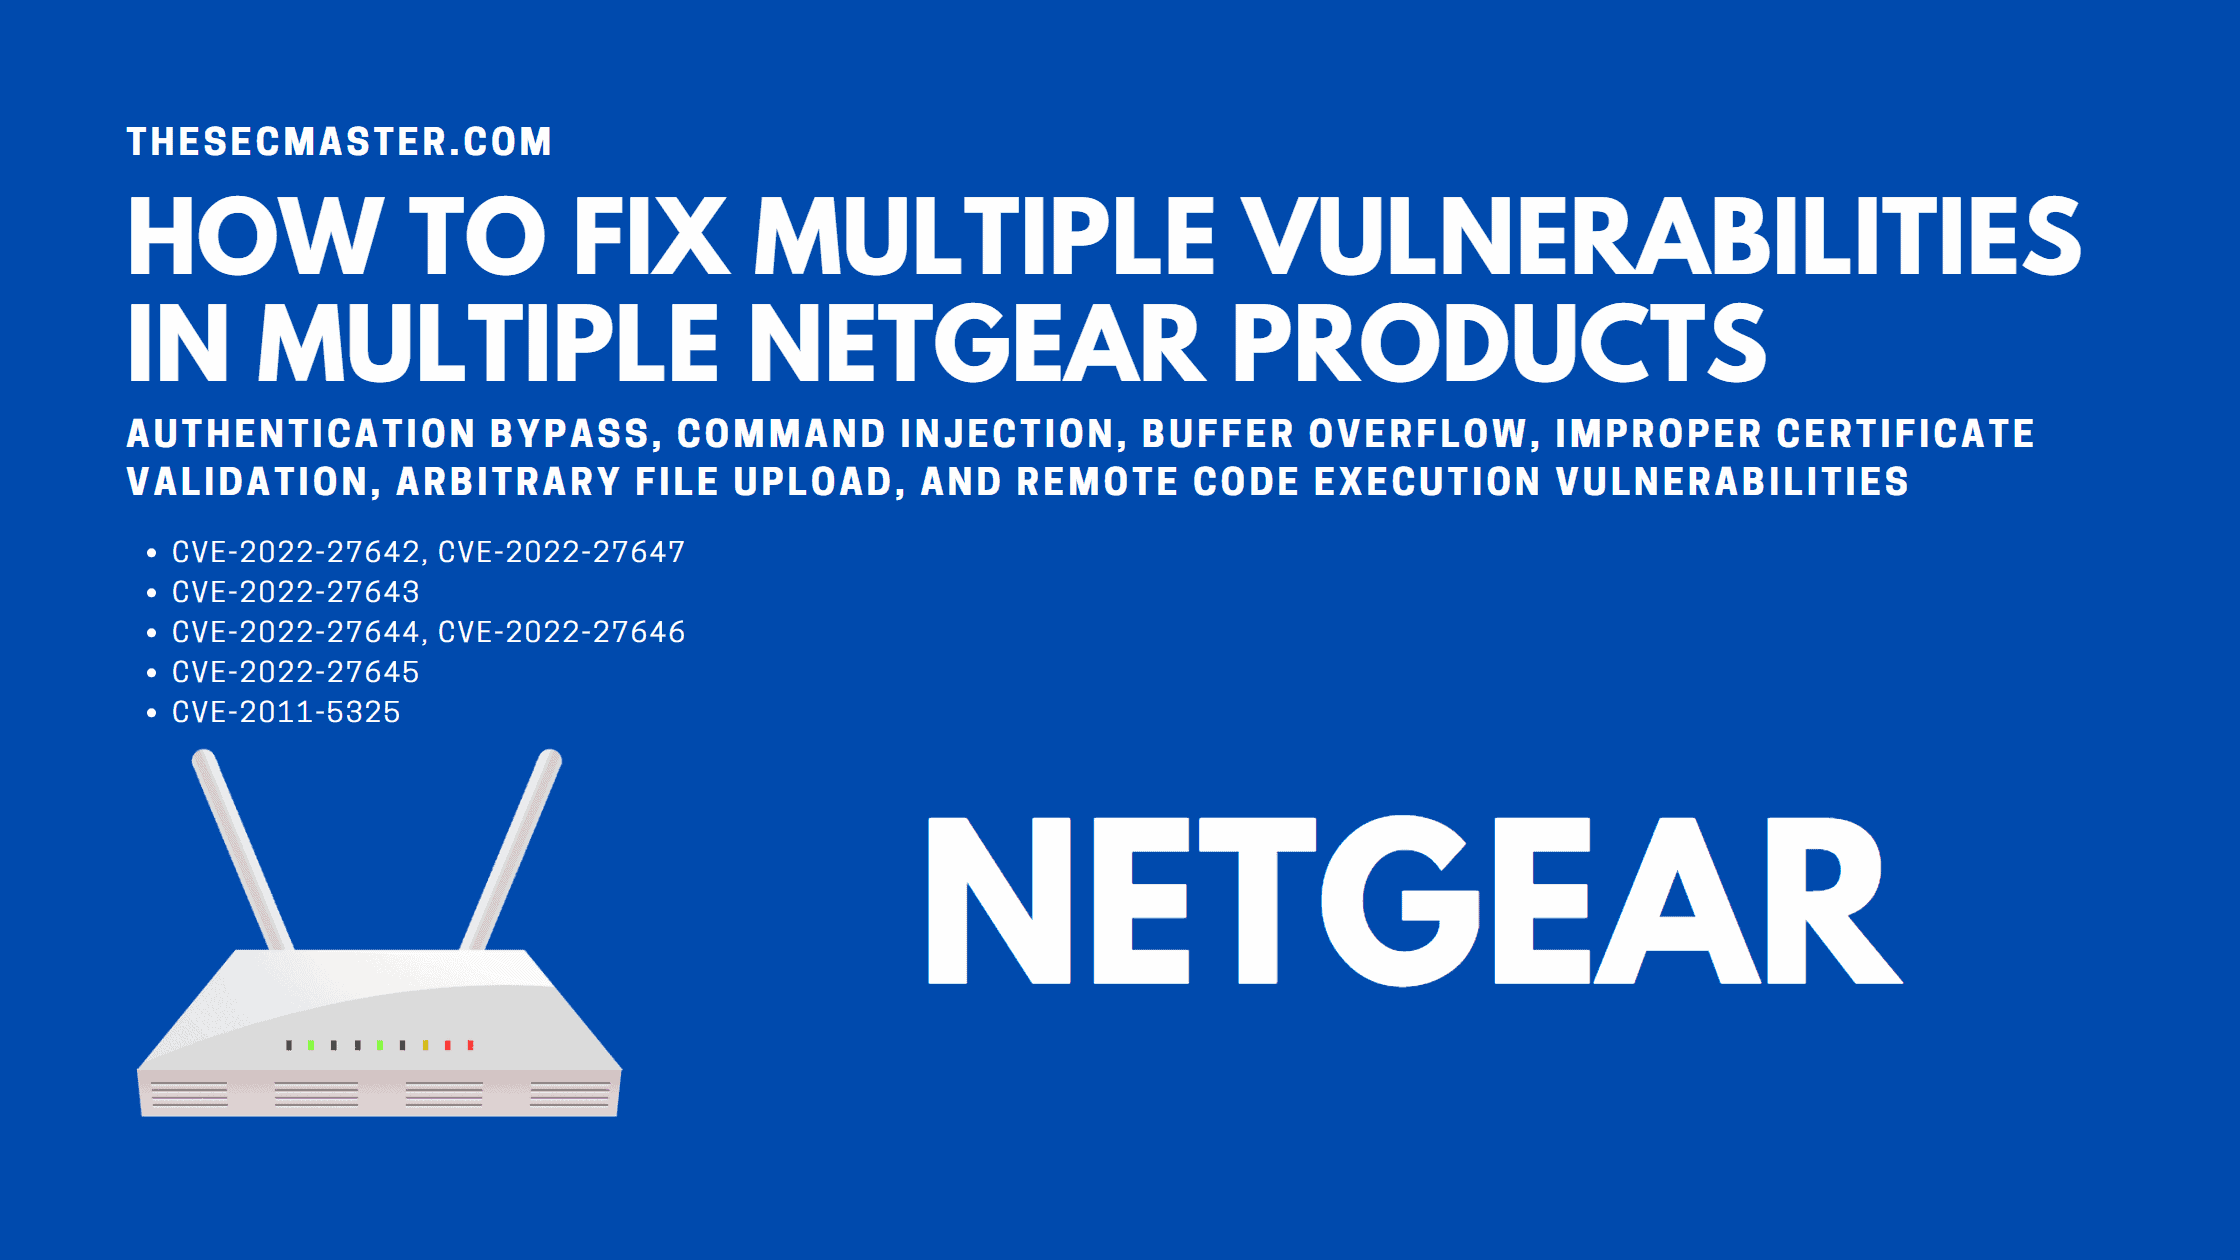 How To Fix Multiple Vulnerabilities In Multiple Netgear Products